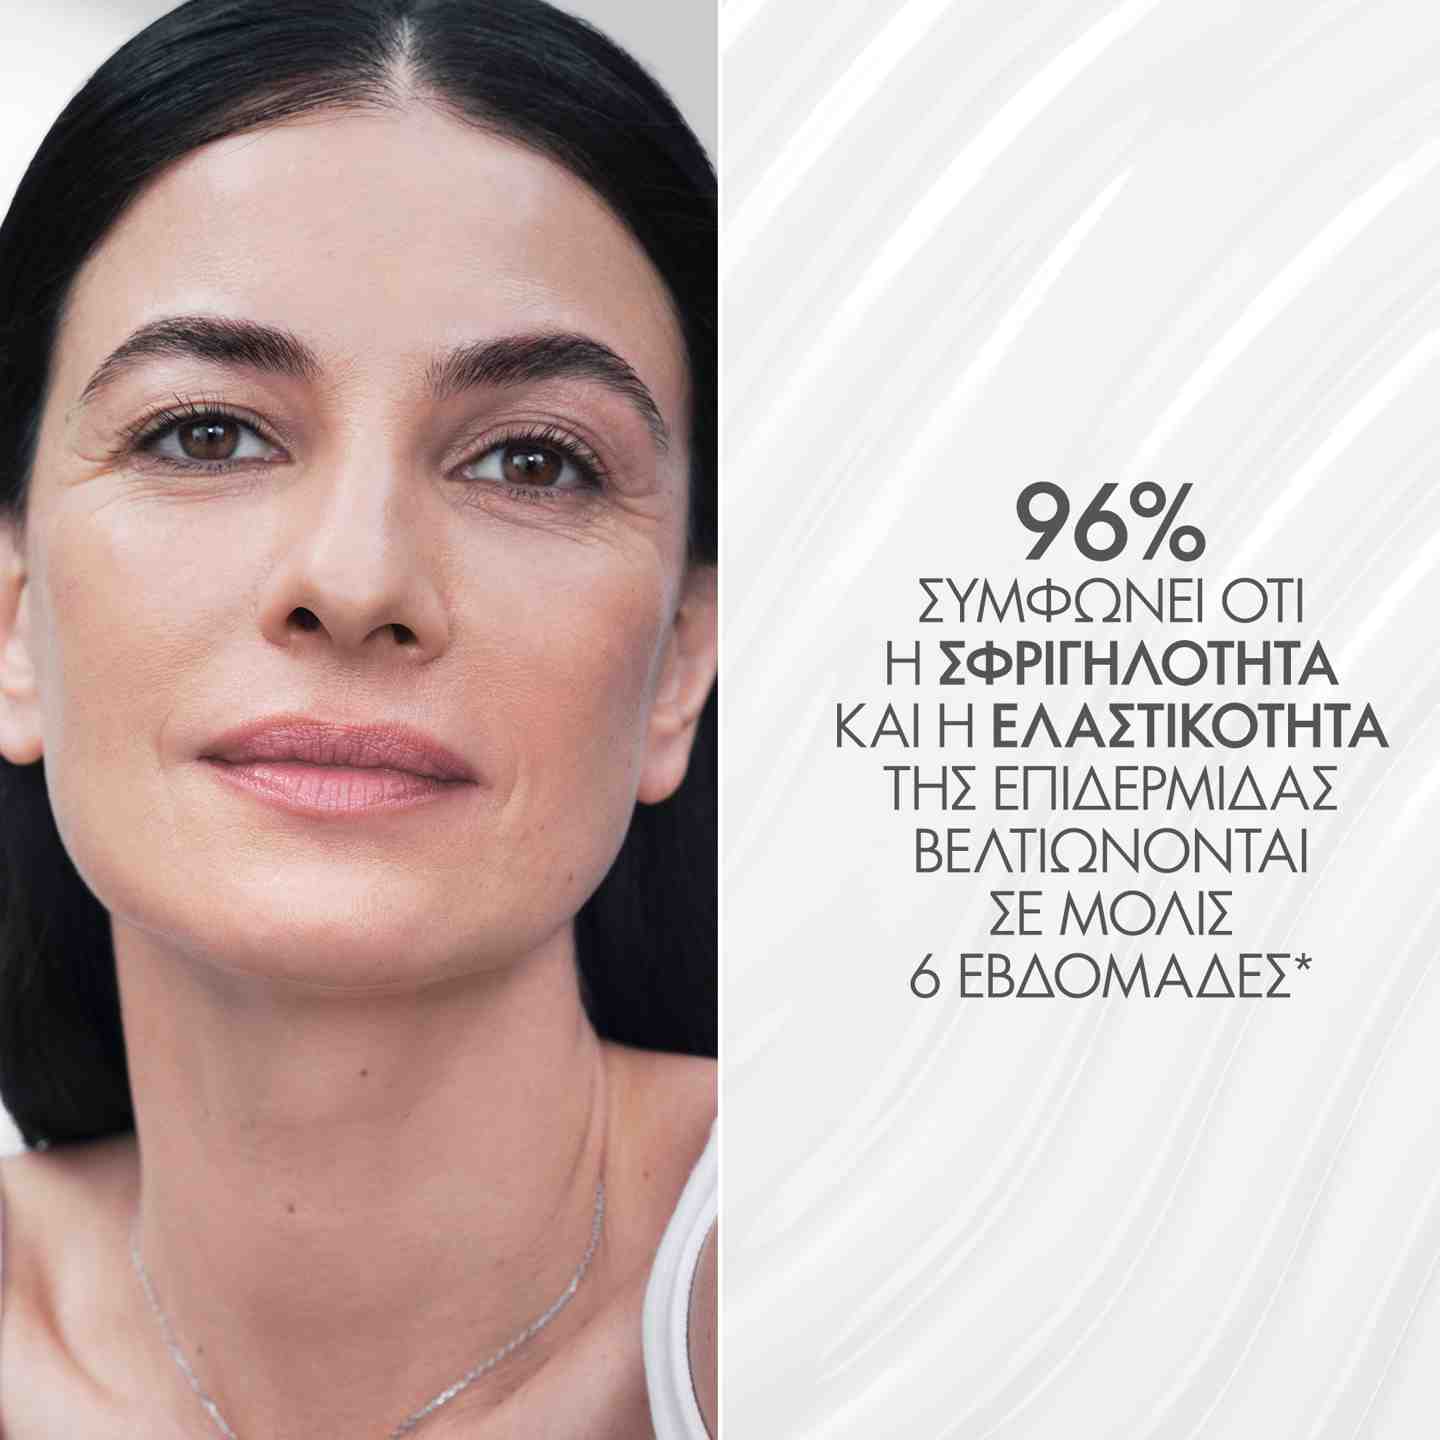 https://media-cdn.oriflame.com/productImage?externalMediaId=product-management-media%2fProducts%2f41037%2fGR%2f41037_2.png&id=17616330&version=1